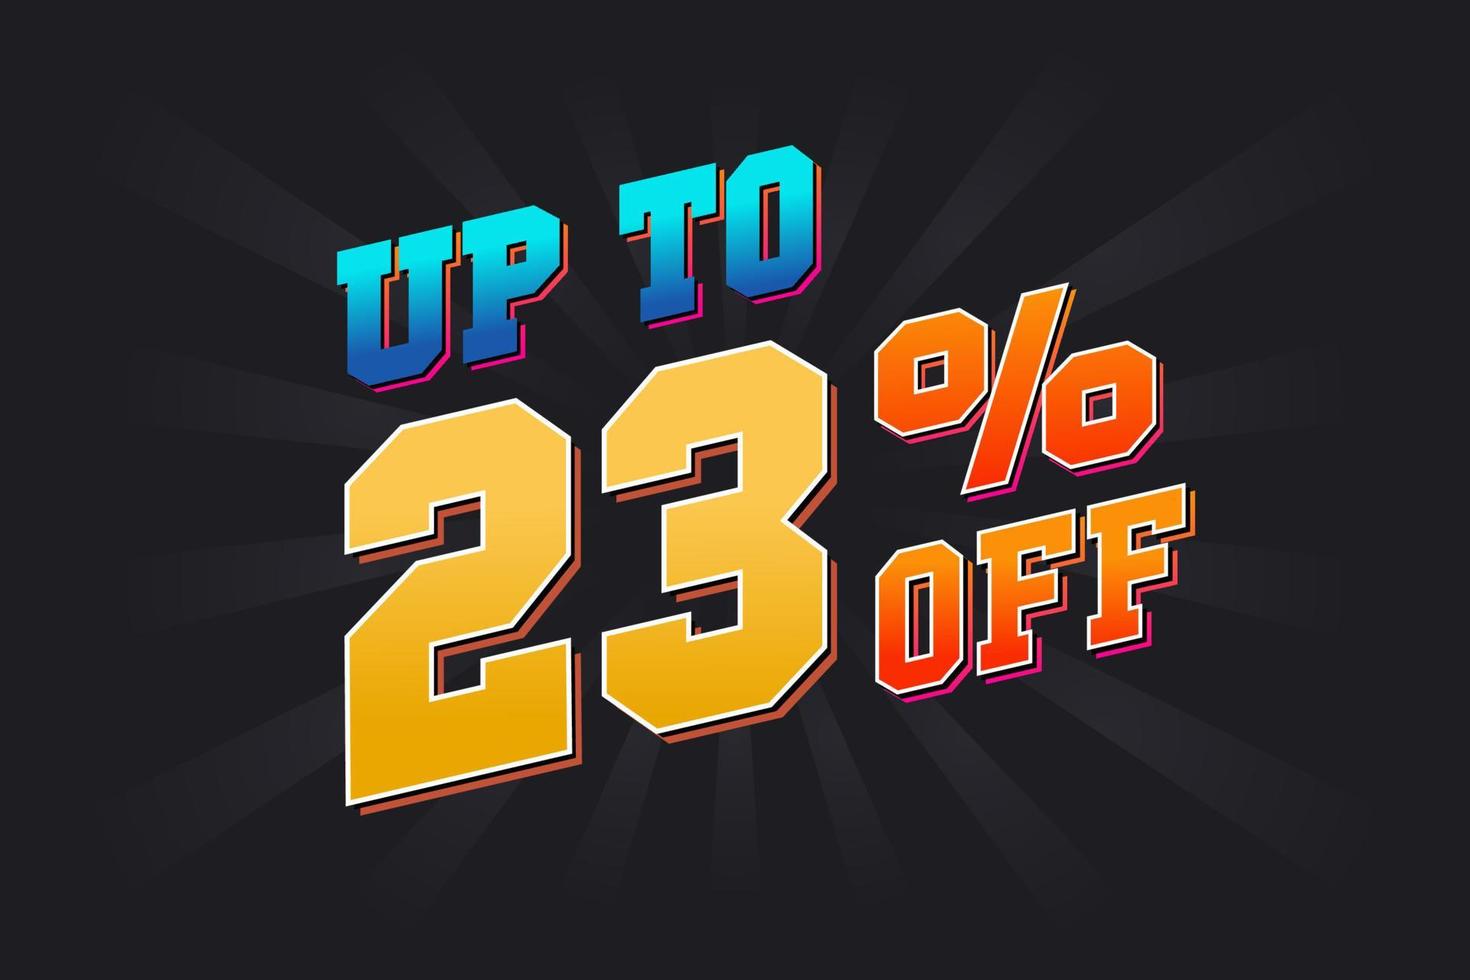 Up To 23 Percent off Special Discount Offer. Upto 23 off Sale of advertising campaign vector graphics.